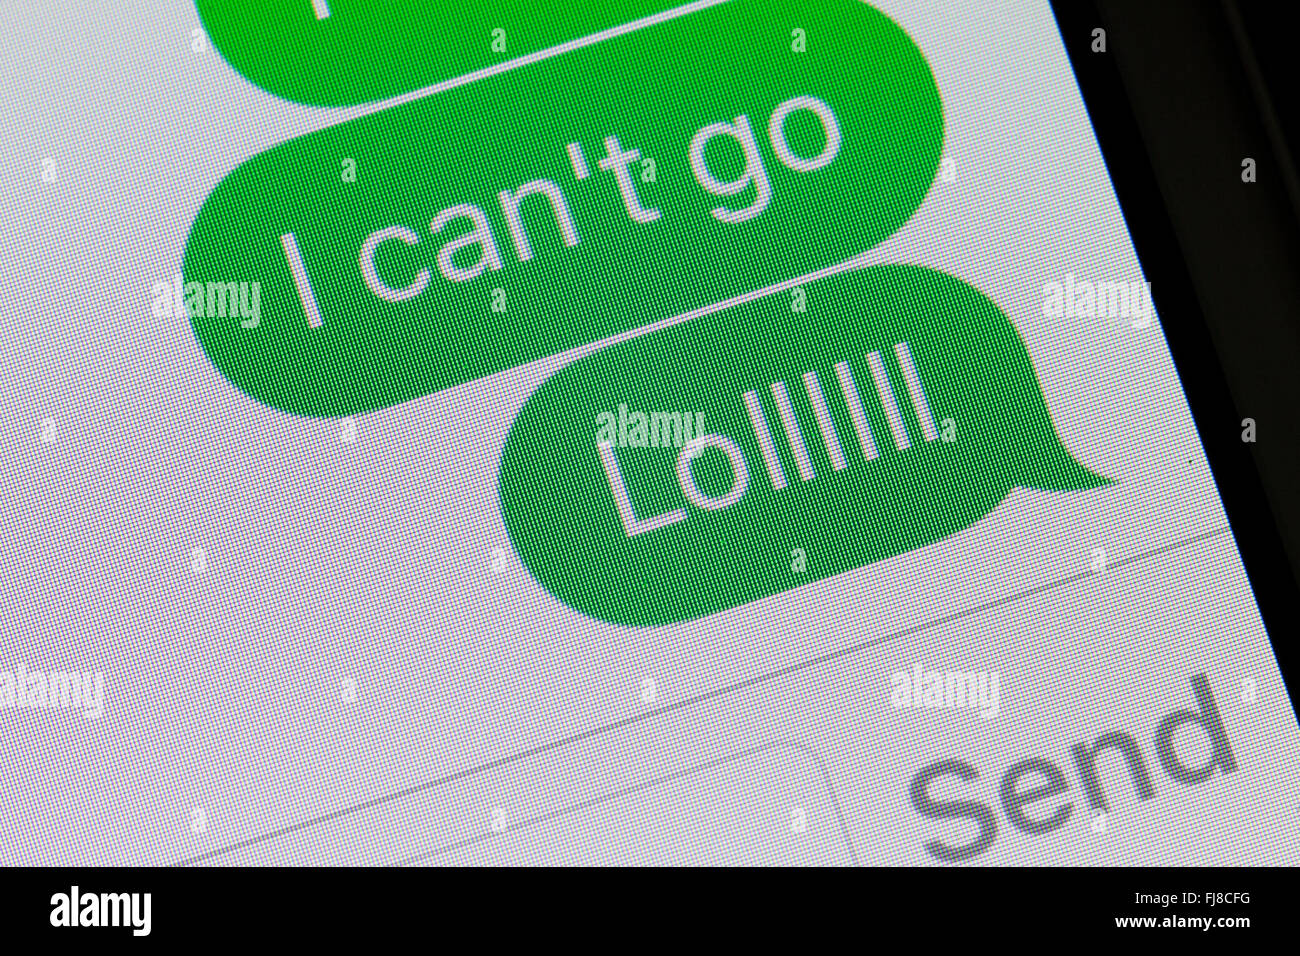 Text message on iPhone screen (LOL text message, common texting slang) - USA Stock Photo